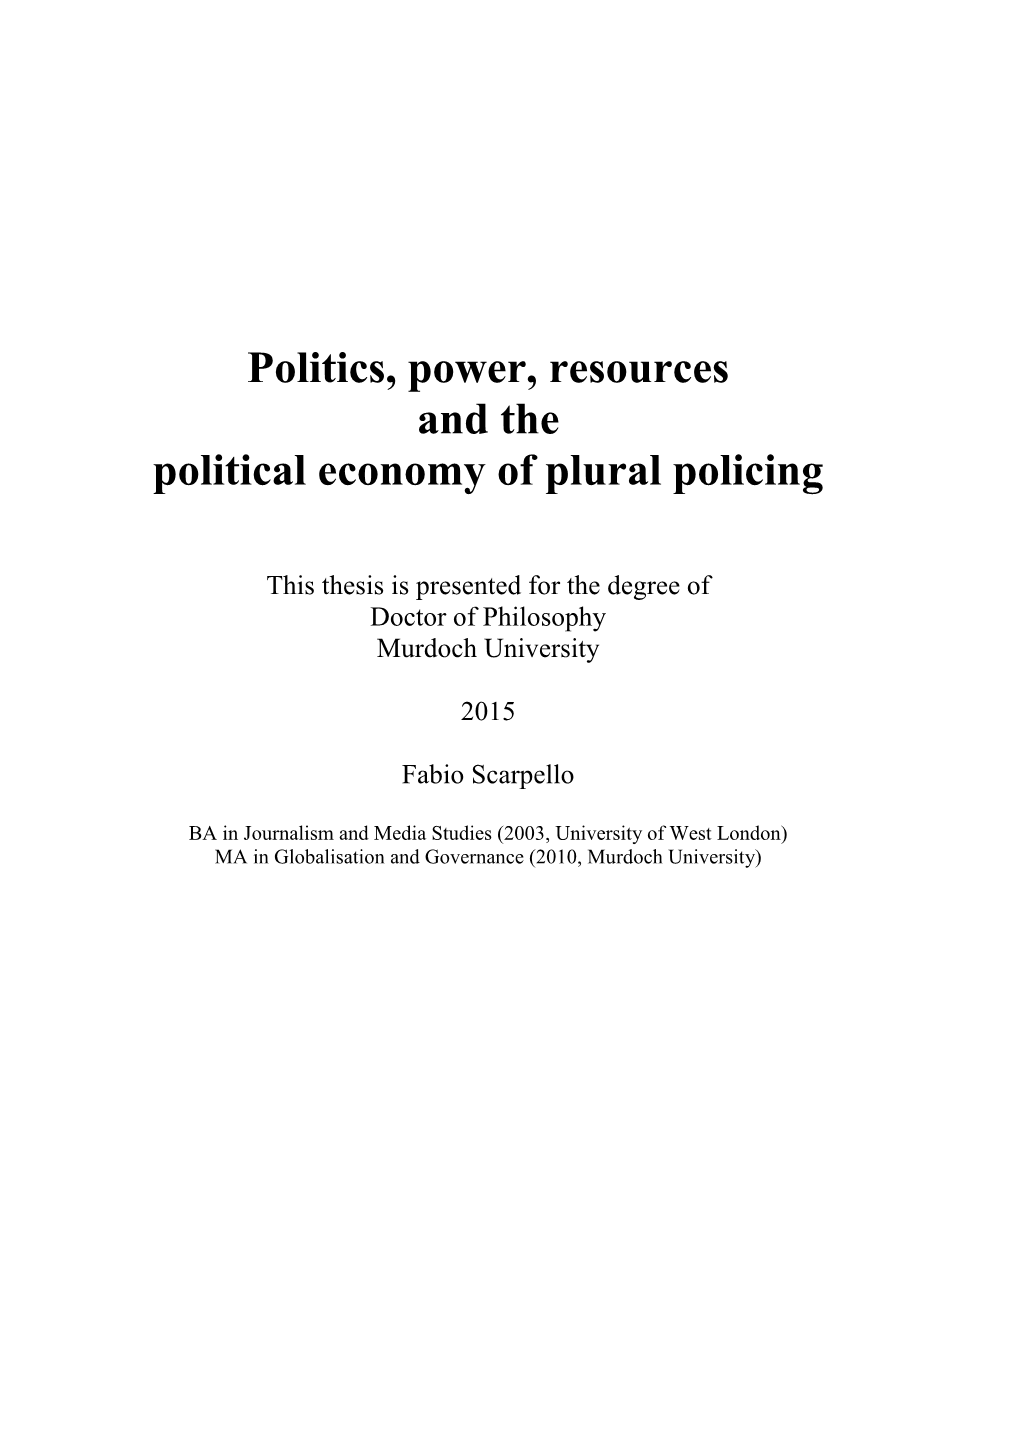 Politics, Power, Resources and the Political Economy of Plural Policing